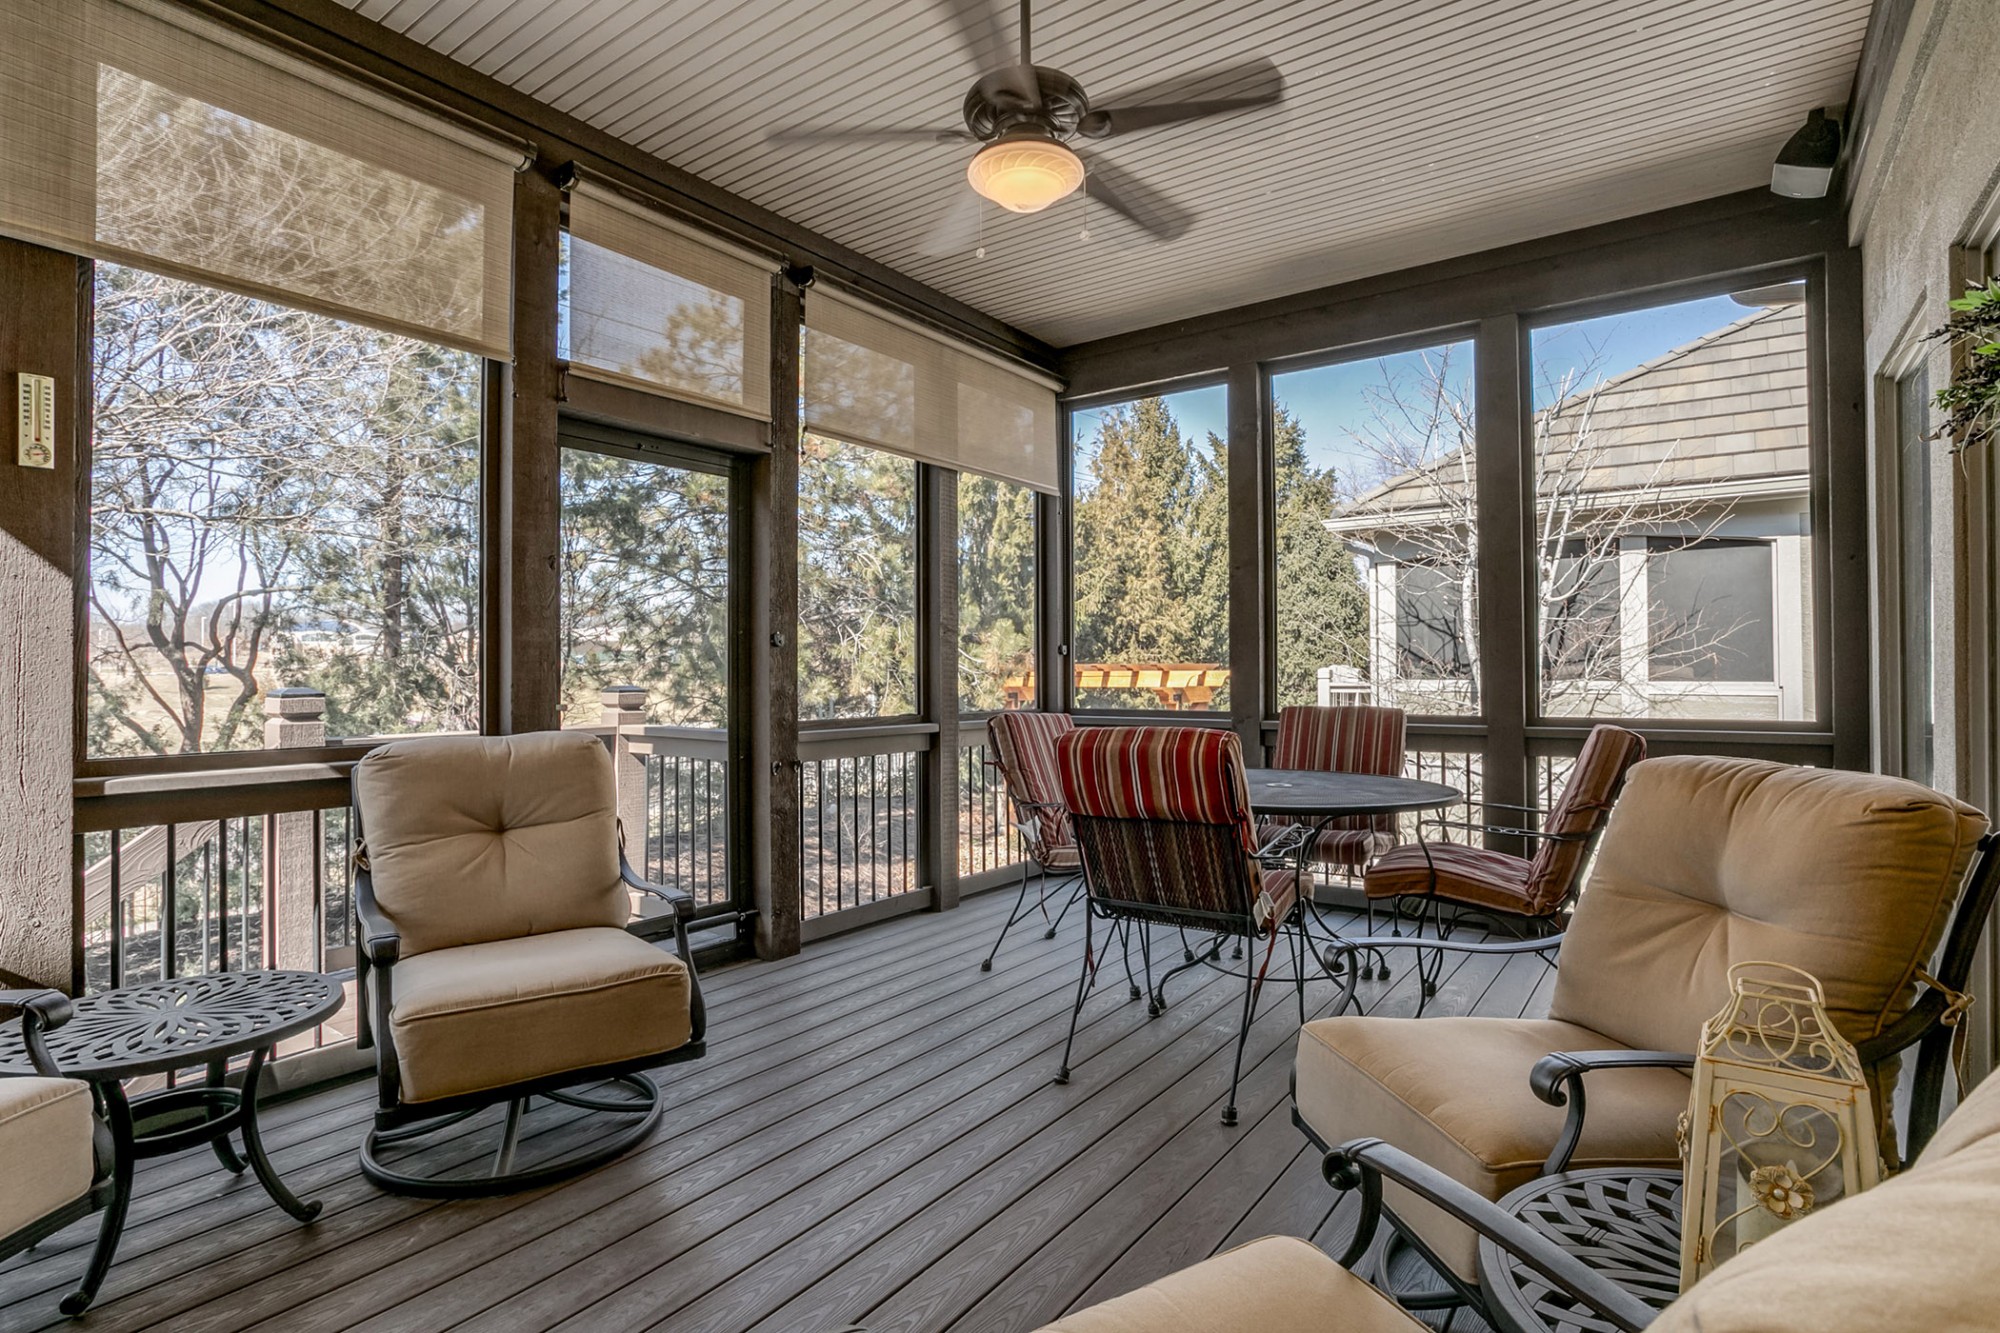 Outside, the entertaining continues on the huge screened porch added by the current owner with lighted ceiling fan, sun shades and overhead speakers.